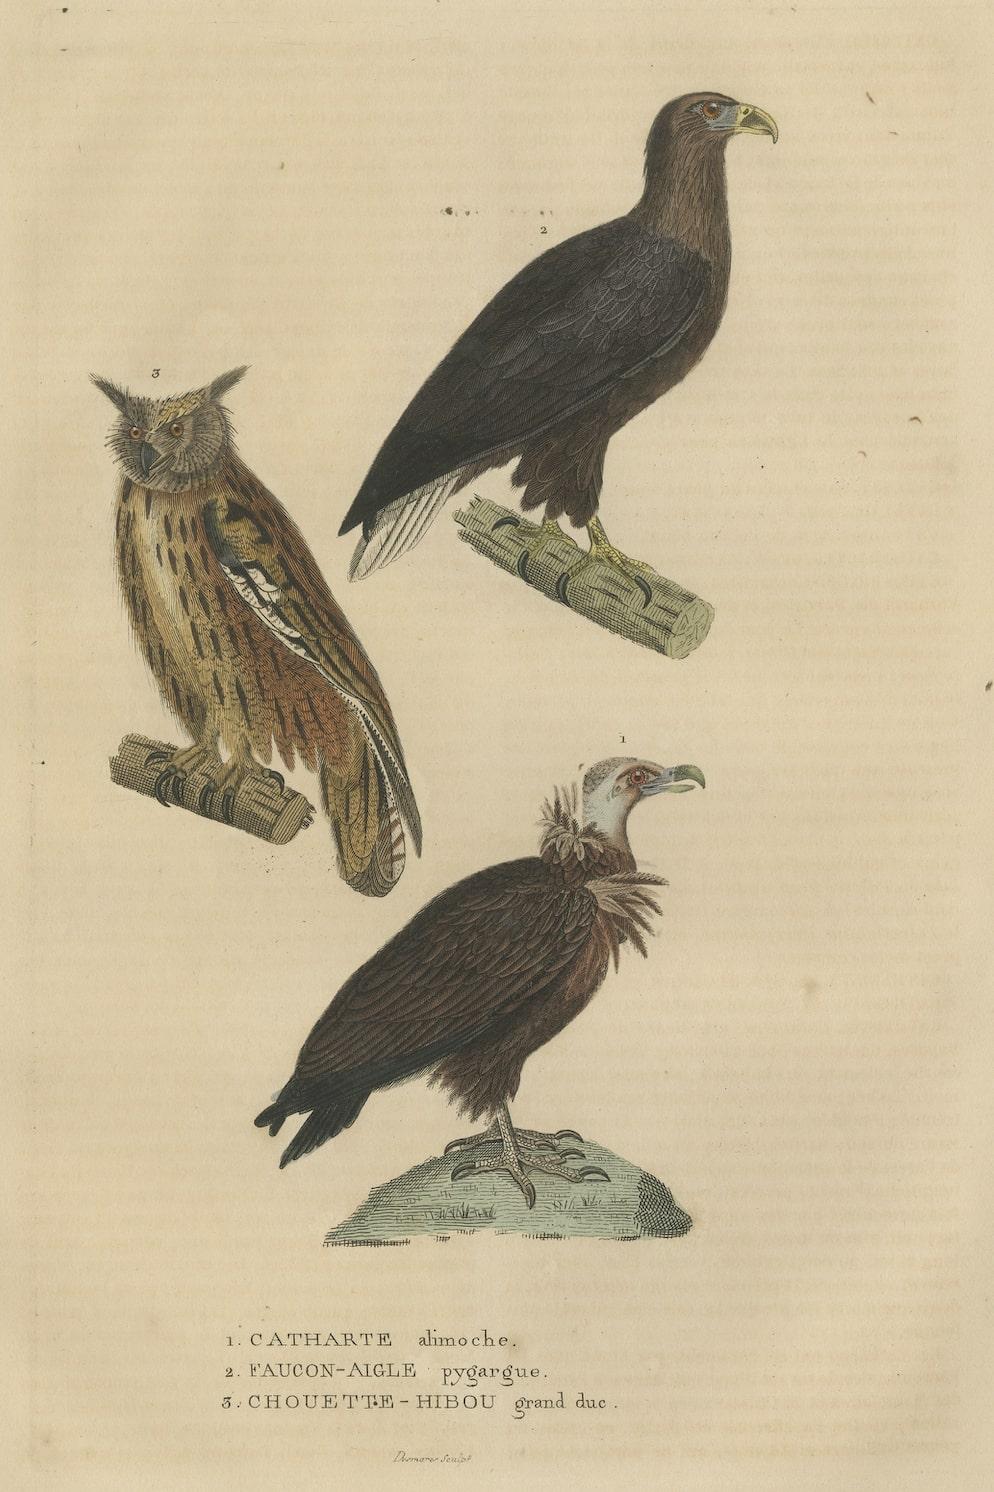 This exquisite hand-colored antique print presents a captivating trio of avian wonders: the Vulture, the Eagle Falcon, and the Owl. Each bird is meticulously depicted with vibrant colors and intricate details, creating a stunning tableau of diverse